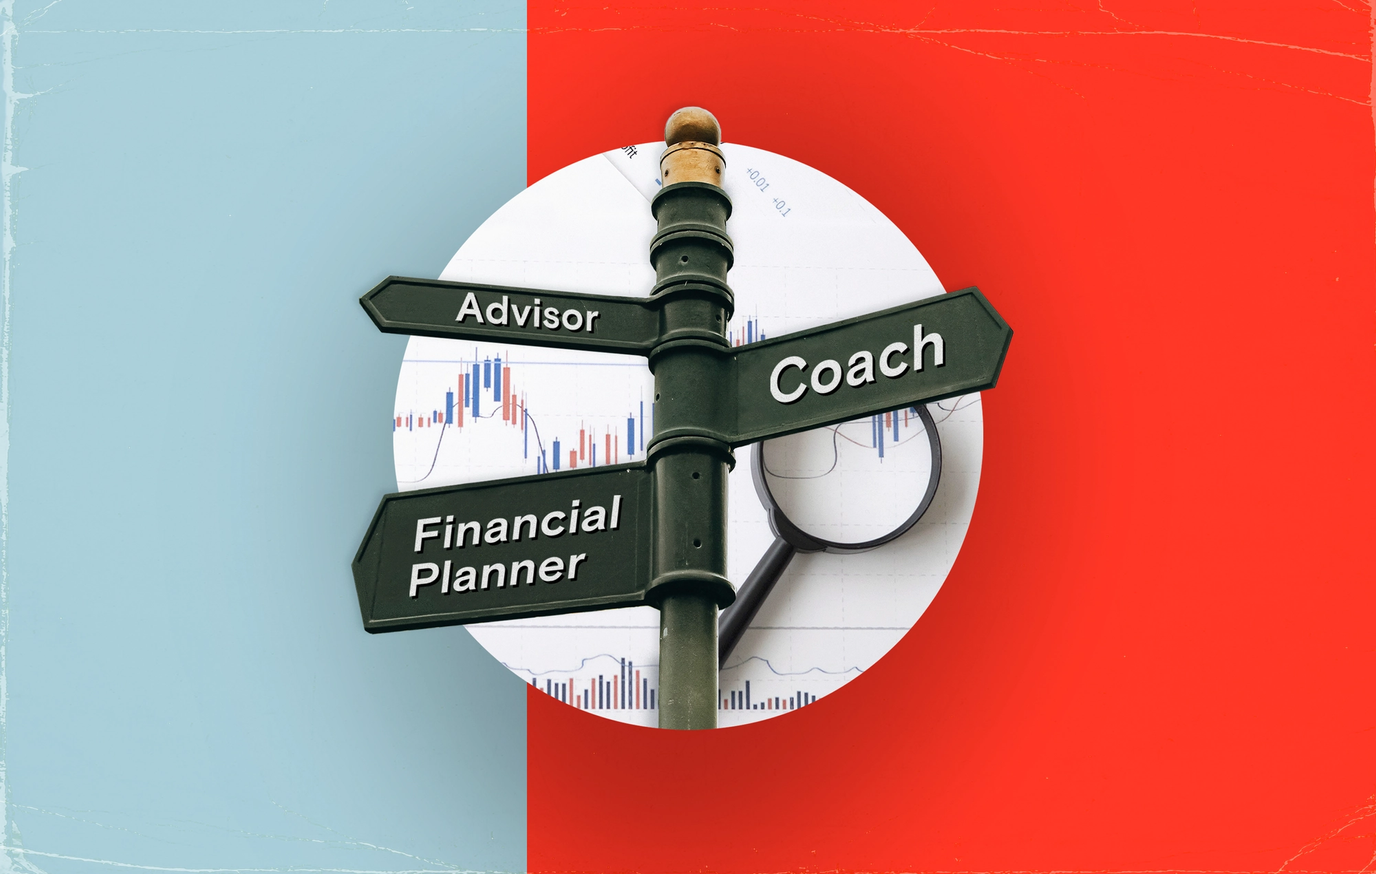 Financial Planner, Advisor or Coach - What's the Difference?